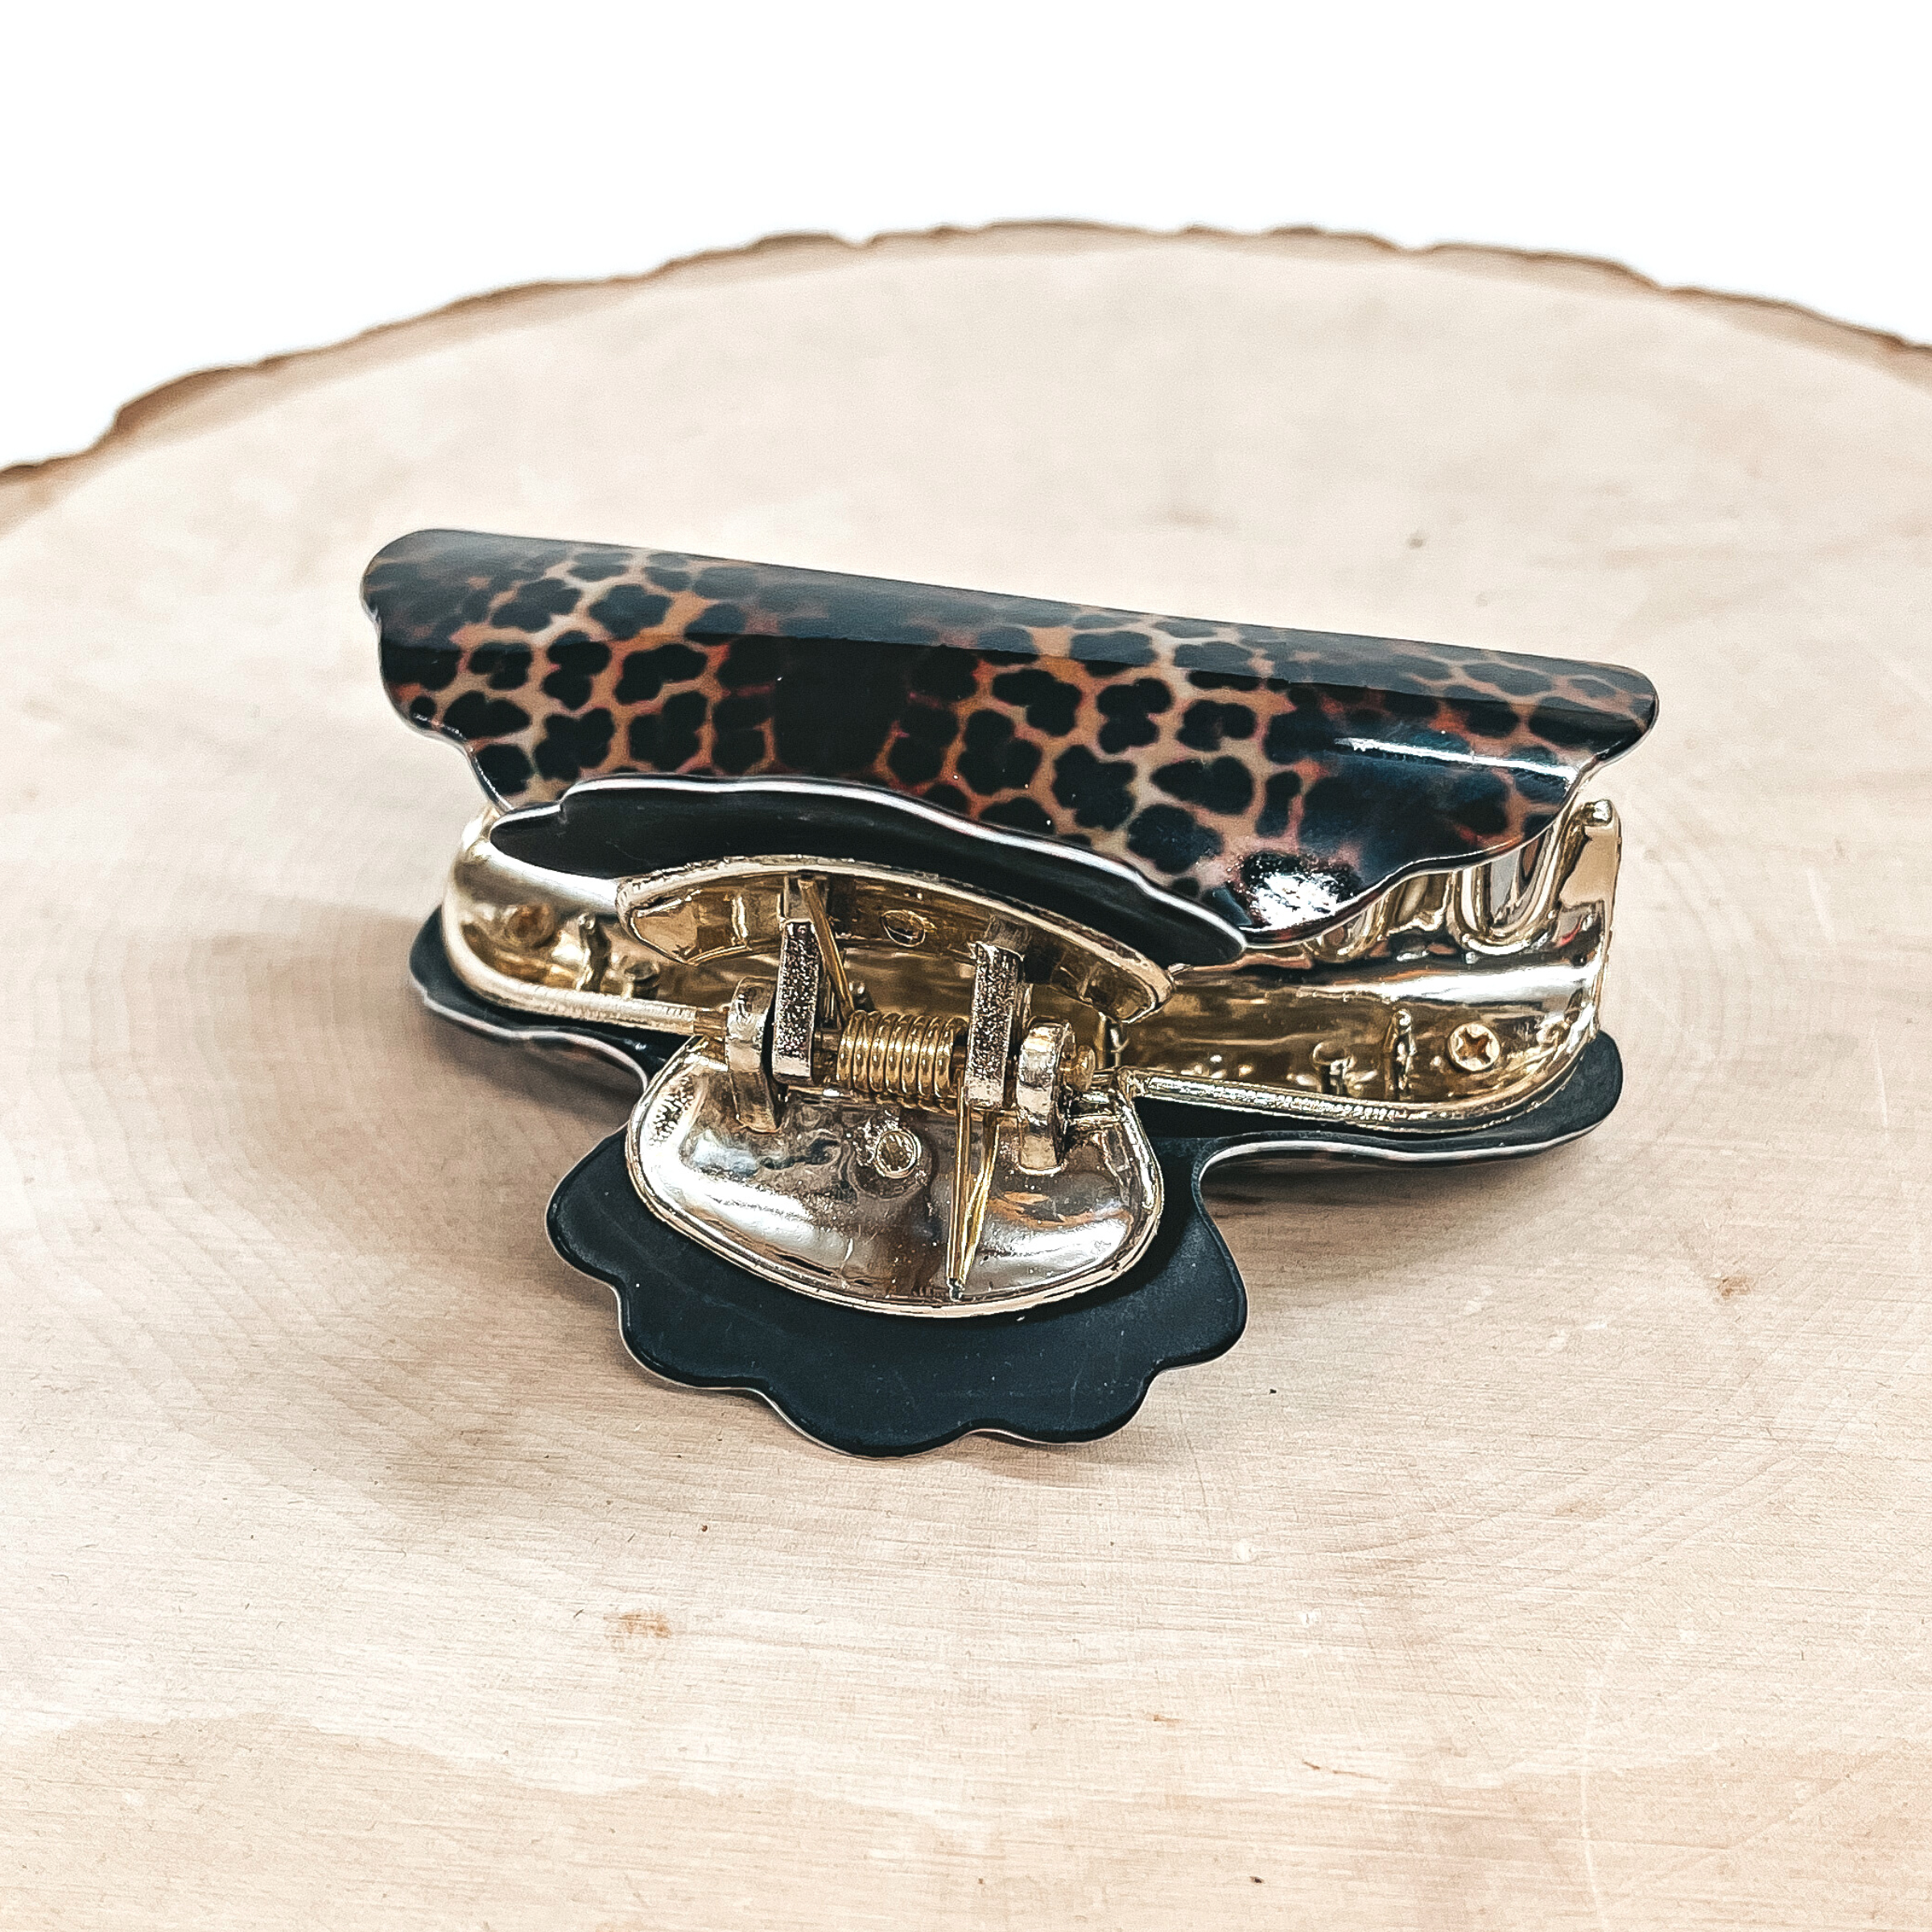 This is a dark leopard print hair clips with a gold tone inlay in black.  This hair clip is taken on a slab of wood and on a white background.